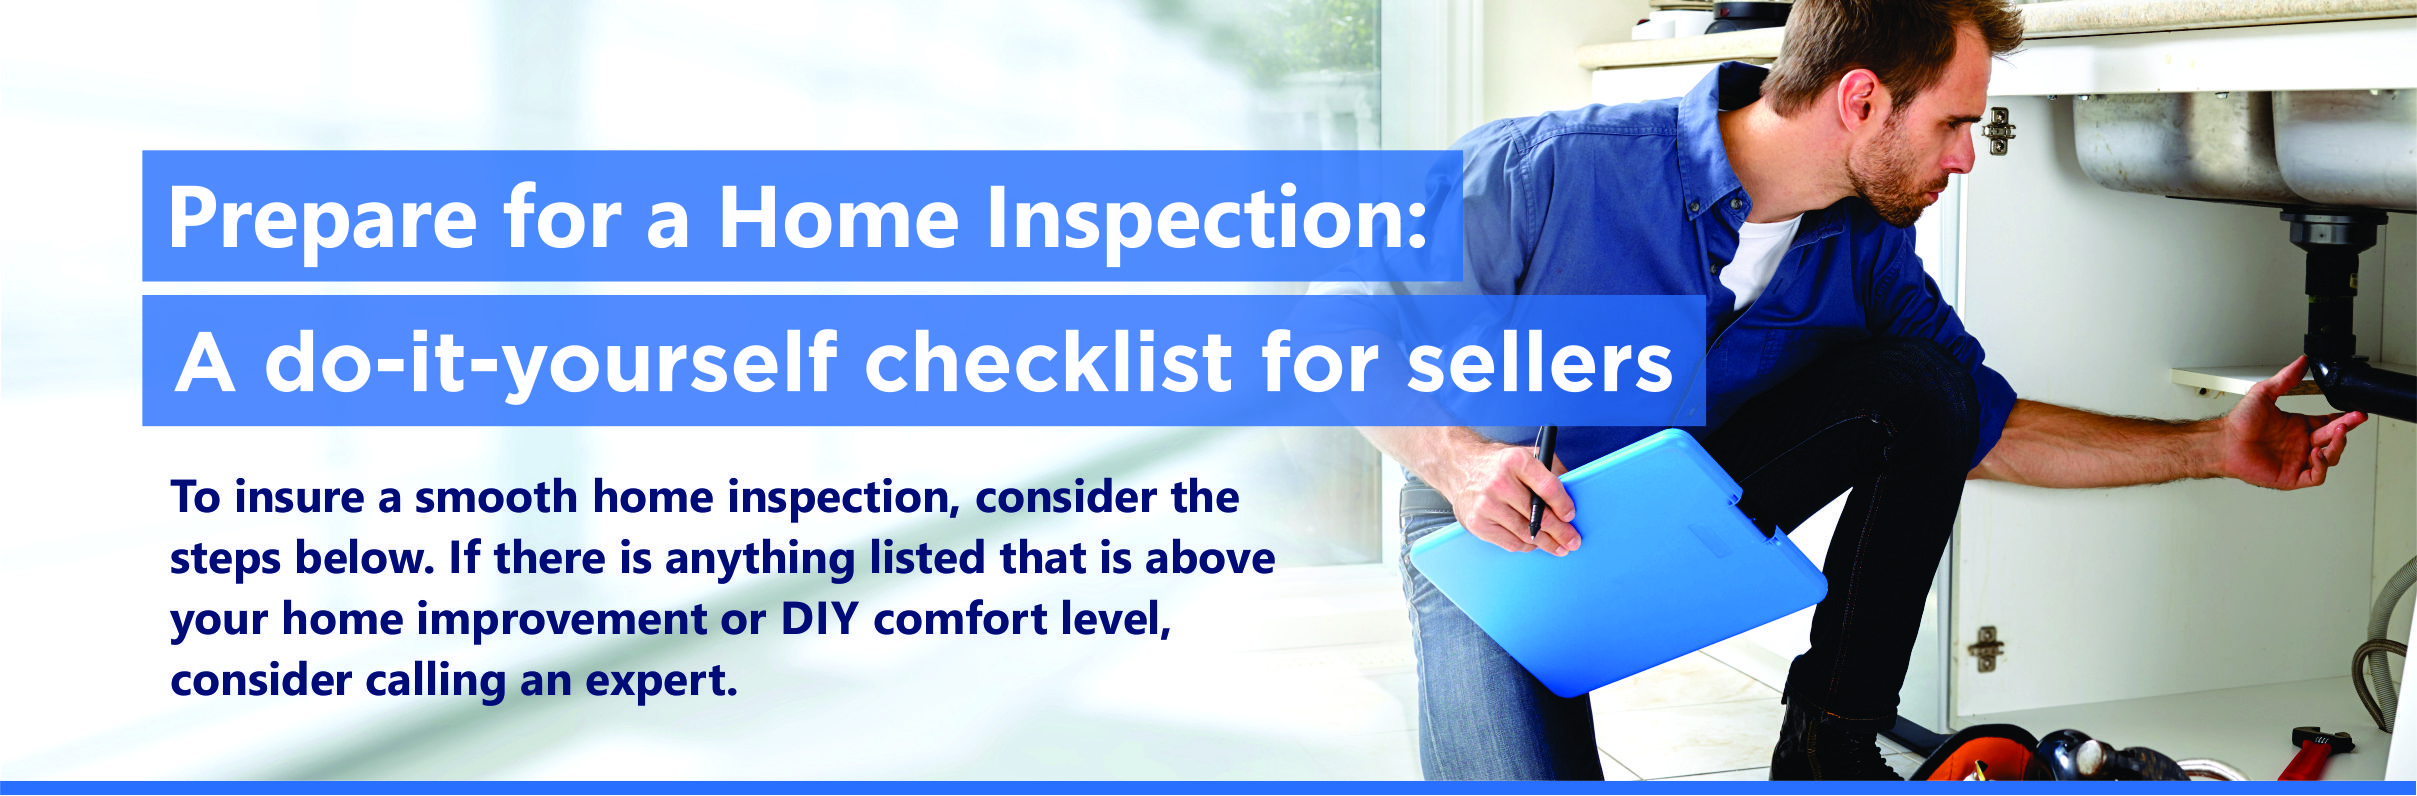 How to Prepare for a Home Inspection | Checklist for Sellers | Fontaine Family - The Real Estate Leader | Auburn, Scarborough, Maine